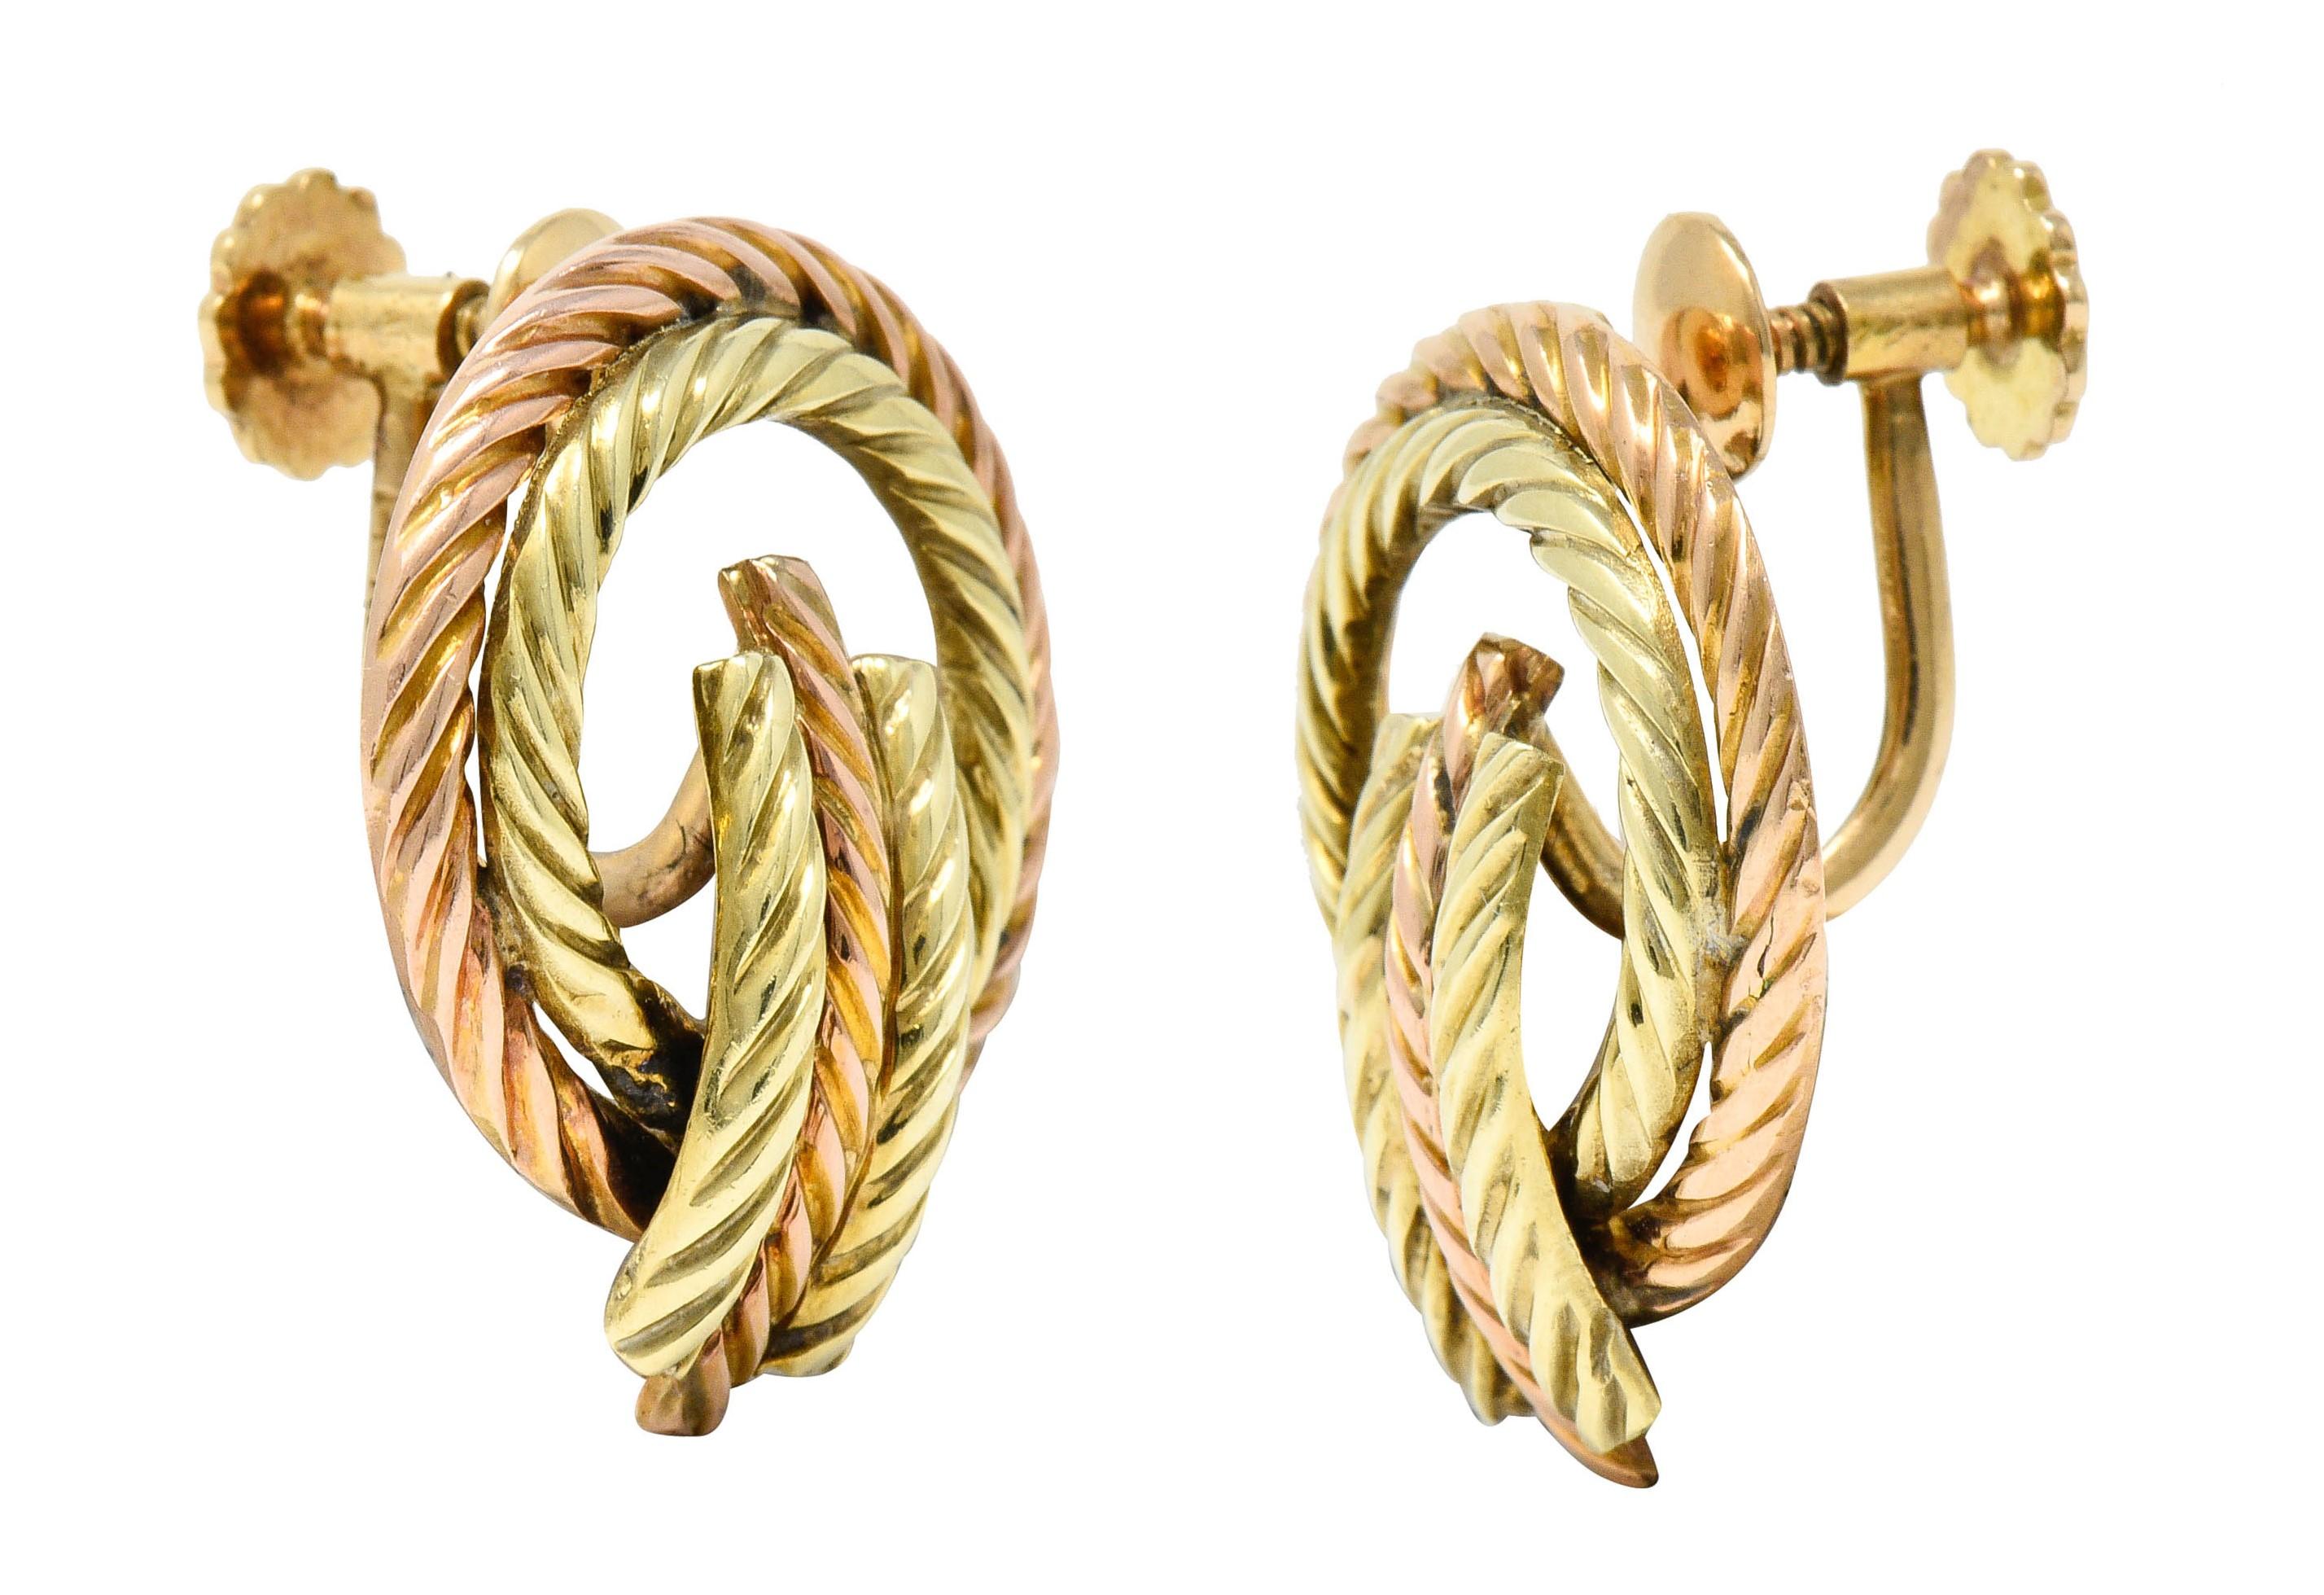 Earrings are designed as two concentric circles of rose and yellow gold
Centering a linear bar station of segmented rose and yellow gold

Entire design features a deeply grooved twisted rope motif

Completed by screwbacks

Stamped 14K for 14 karat